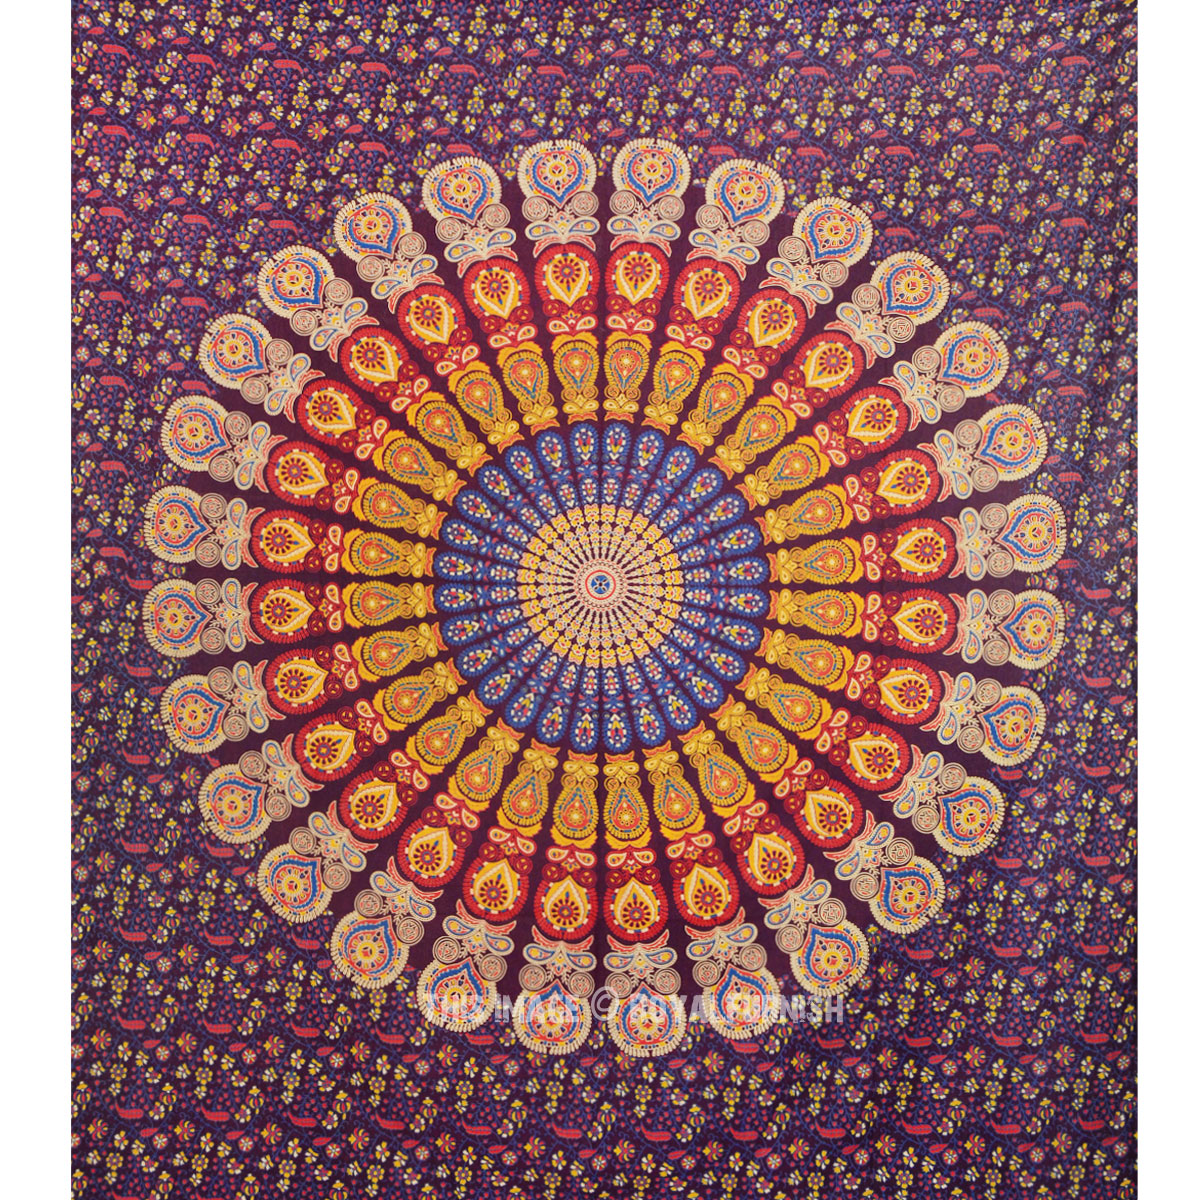 Purple Multicolor Cool Floral Mandala Hippie Tapestry Wall Hanging ...